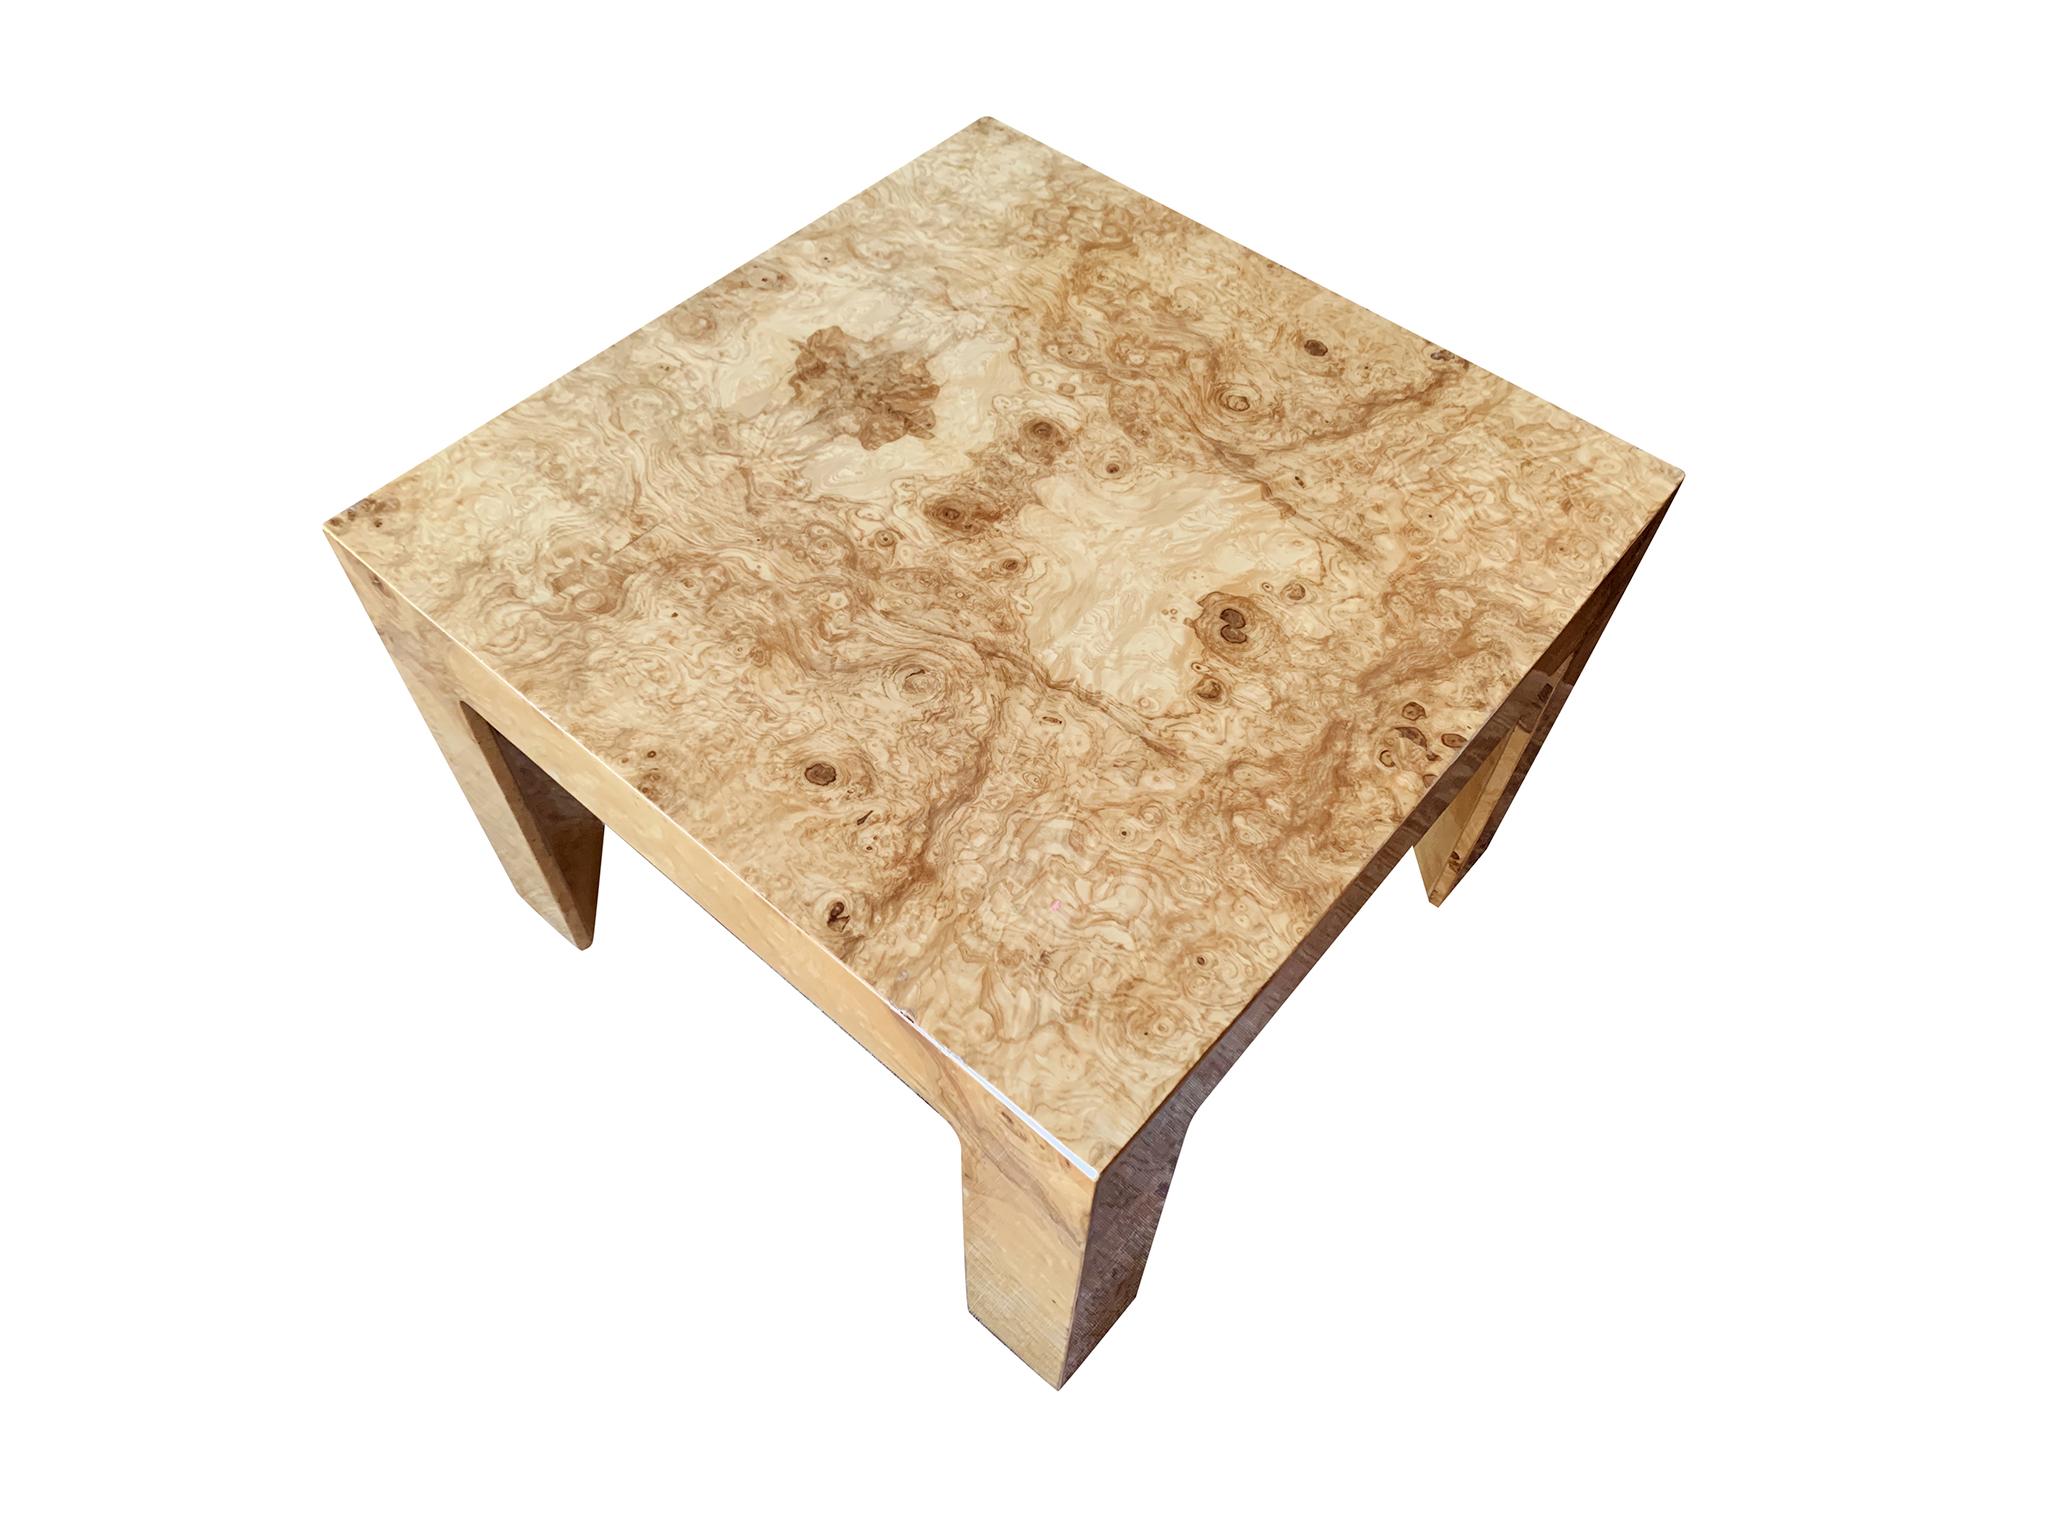 A 1970s square coffee or side table. It is comprised of burl wood with a warm honey-yellow hue and grain. This elegant table that marries simple, slick-lined form with a rich, eye-dazzling surface. Other noteworthy design qualities are the table's